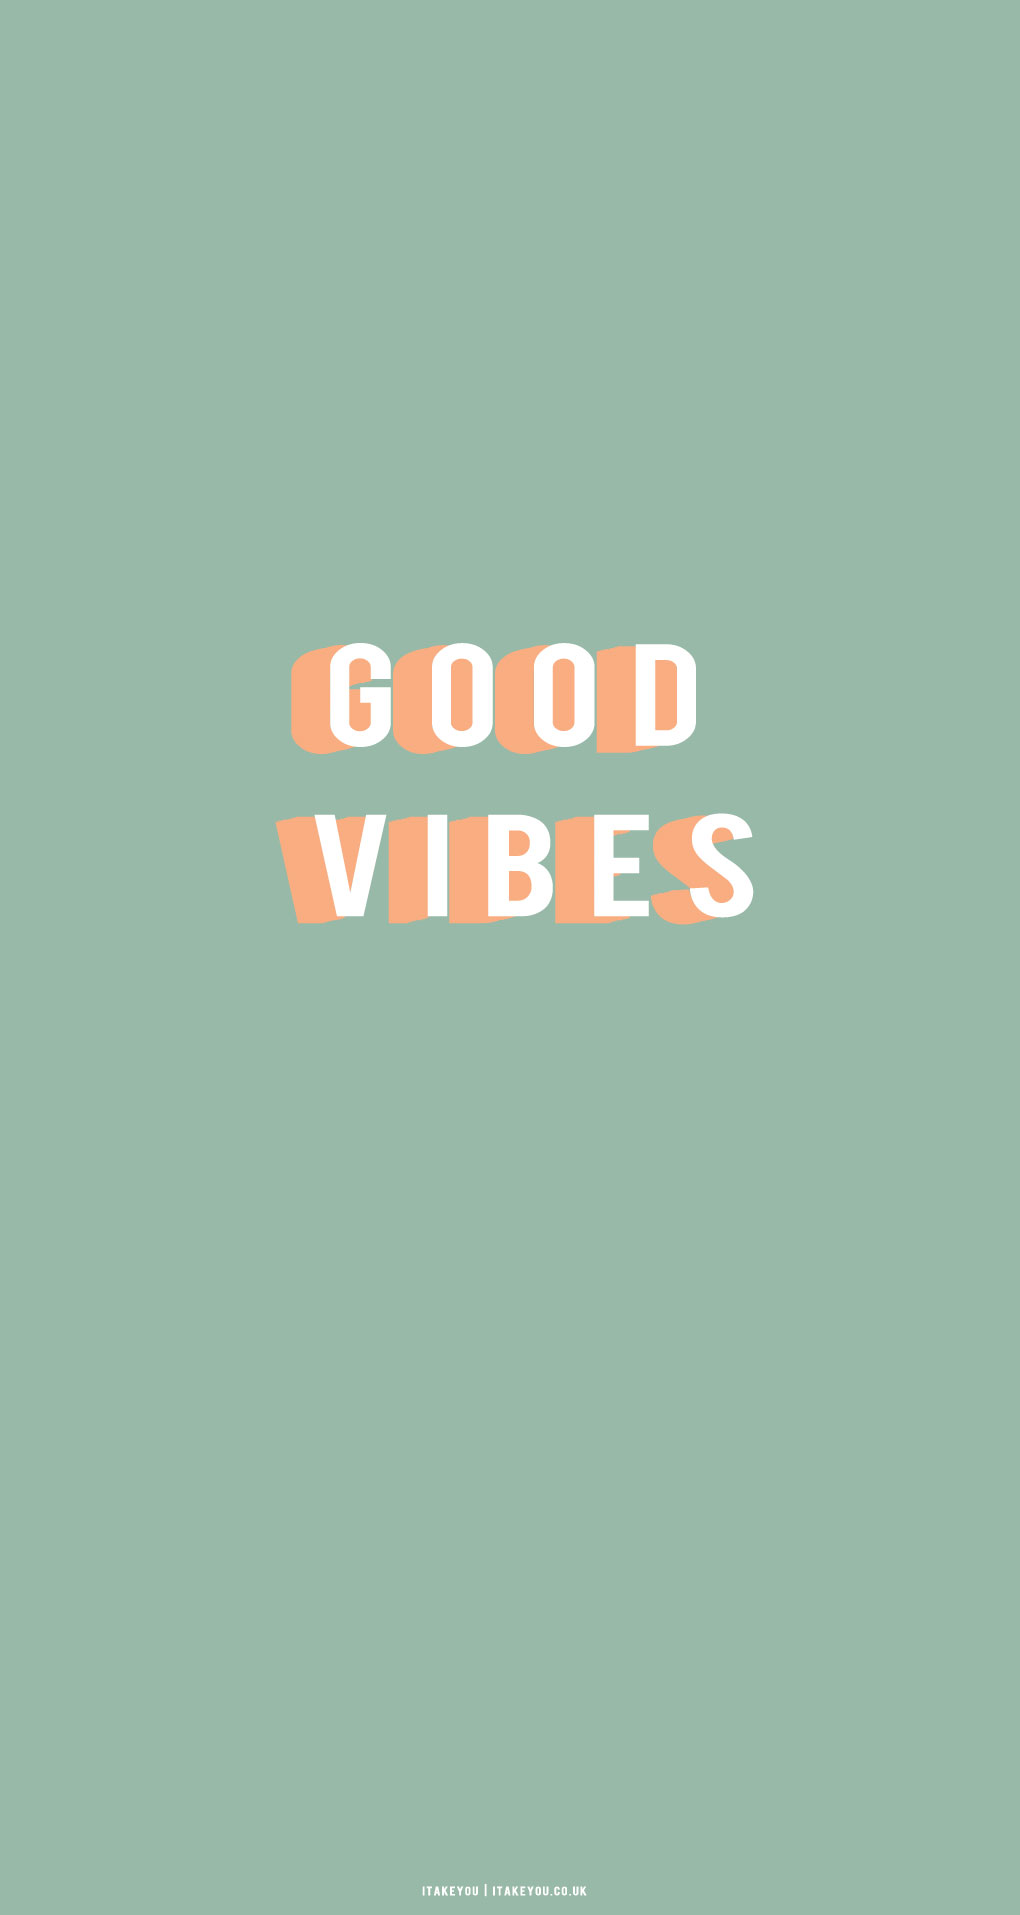 Good Vibes Only Wallpaper Free Stock Photo